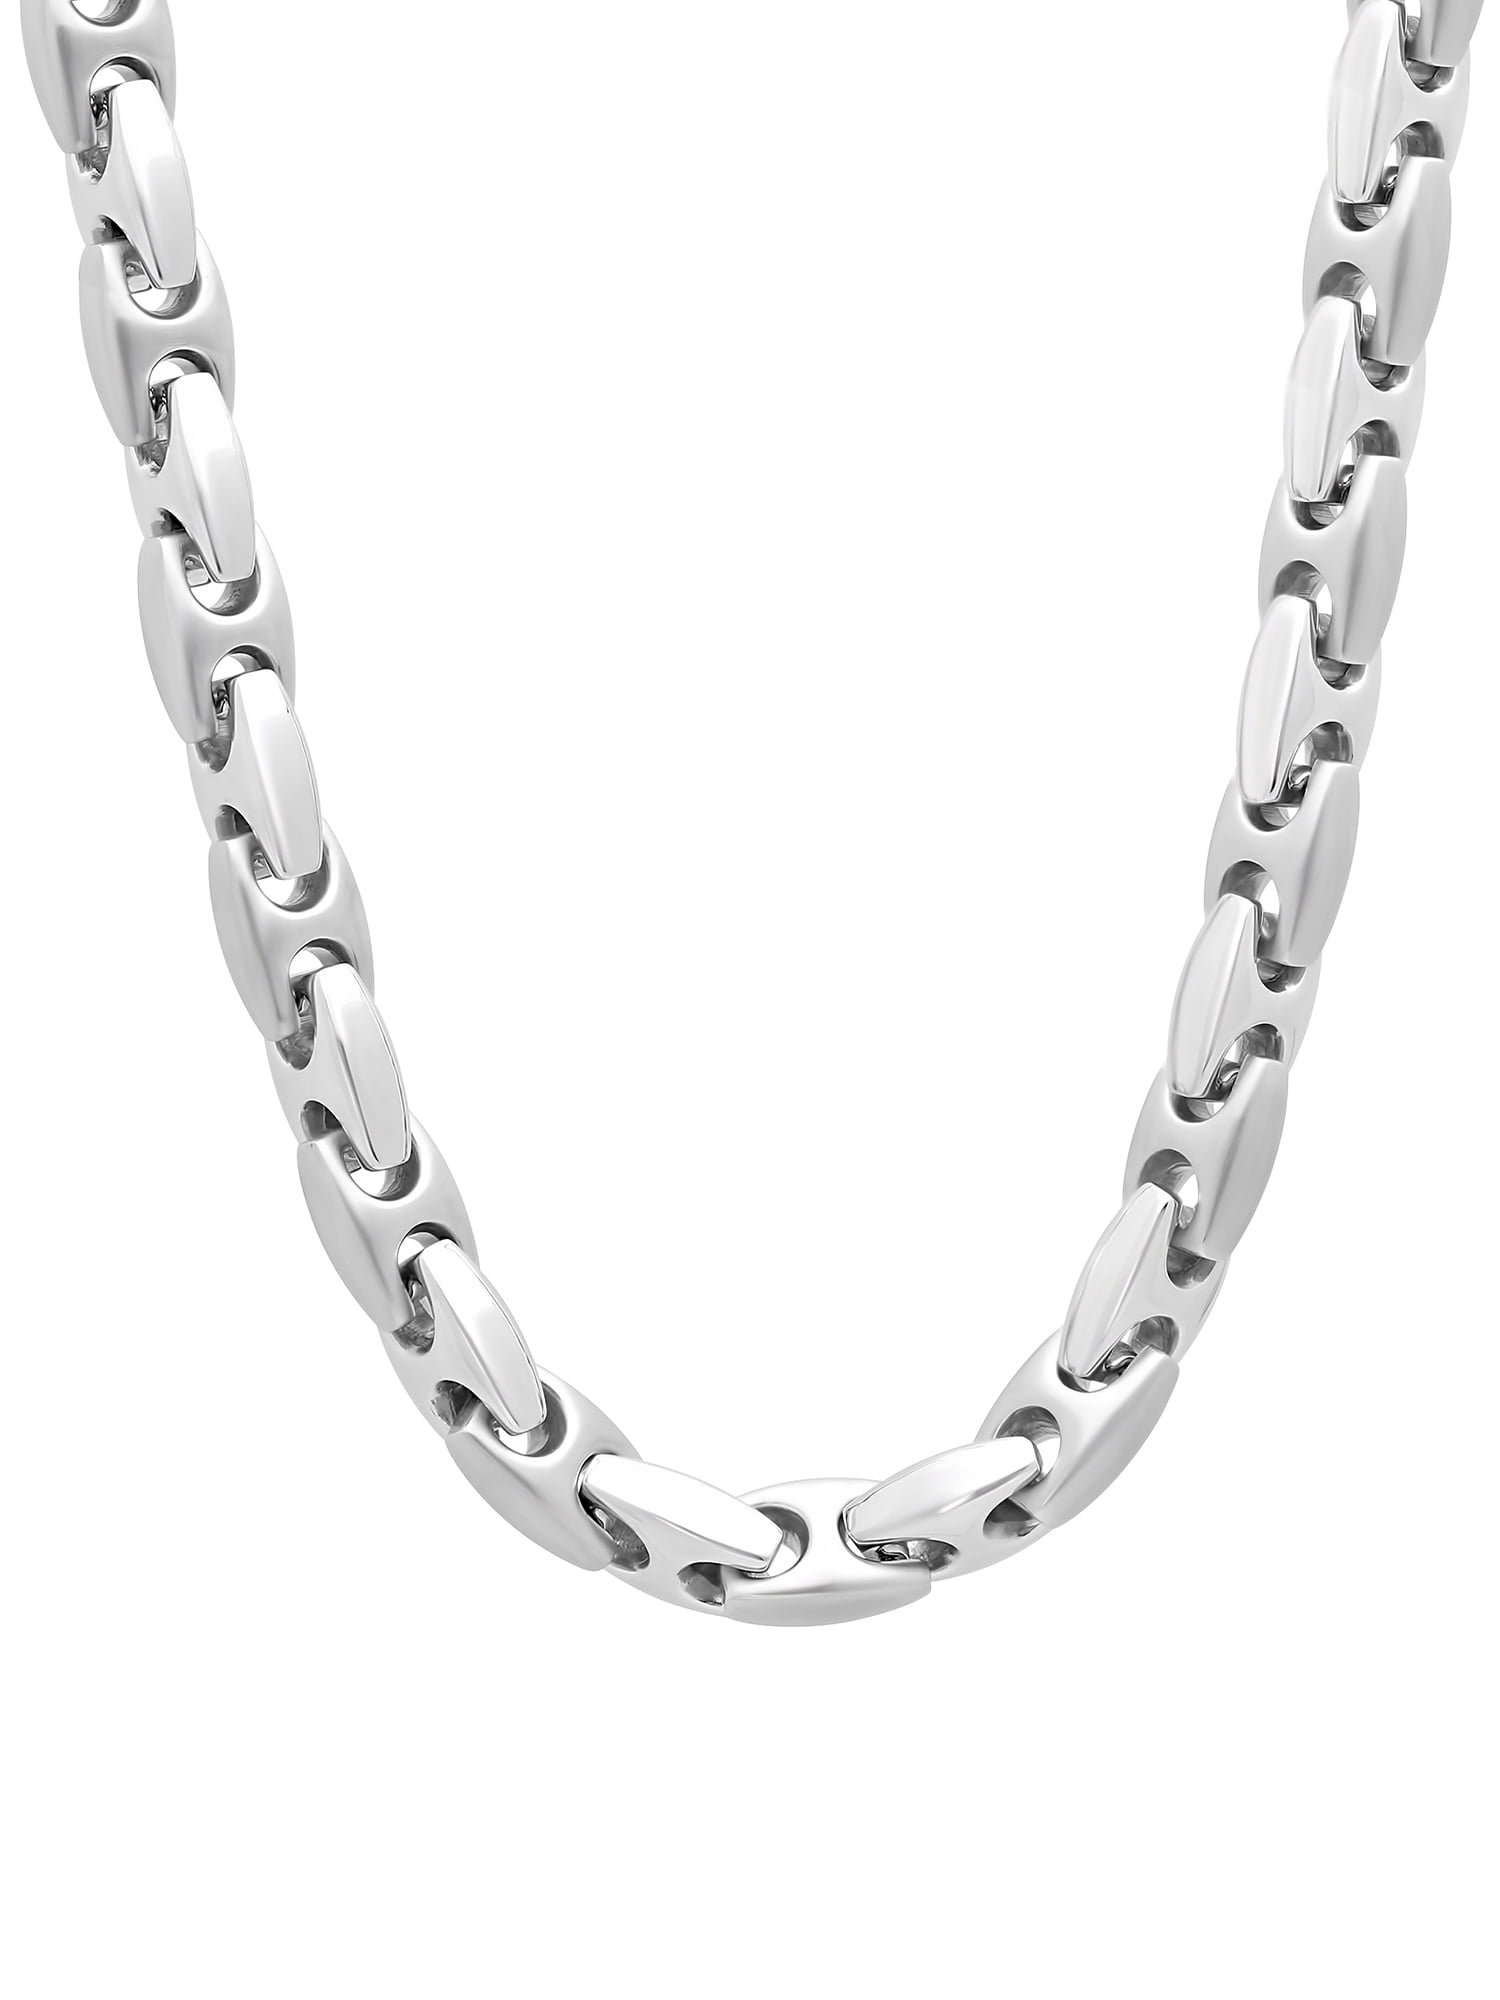 Necklaces Stainless Steel Marine Chain Necklace Nkj2516 24 Wholesale Jewelry Website Unisex